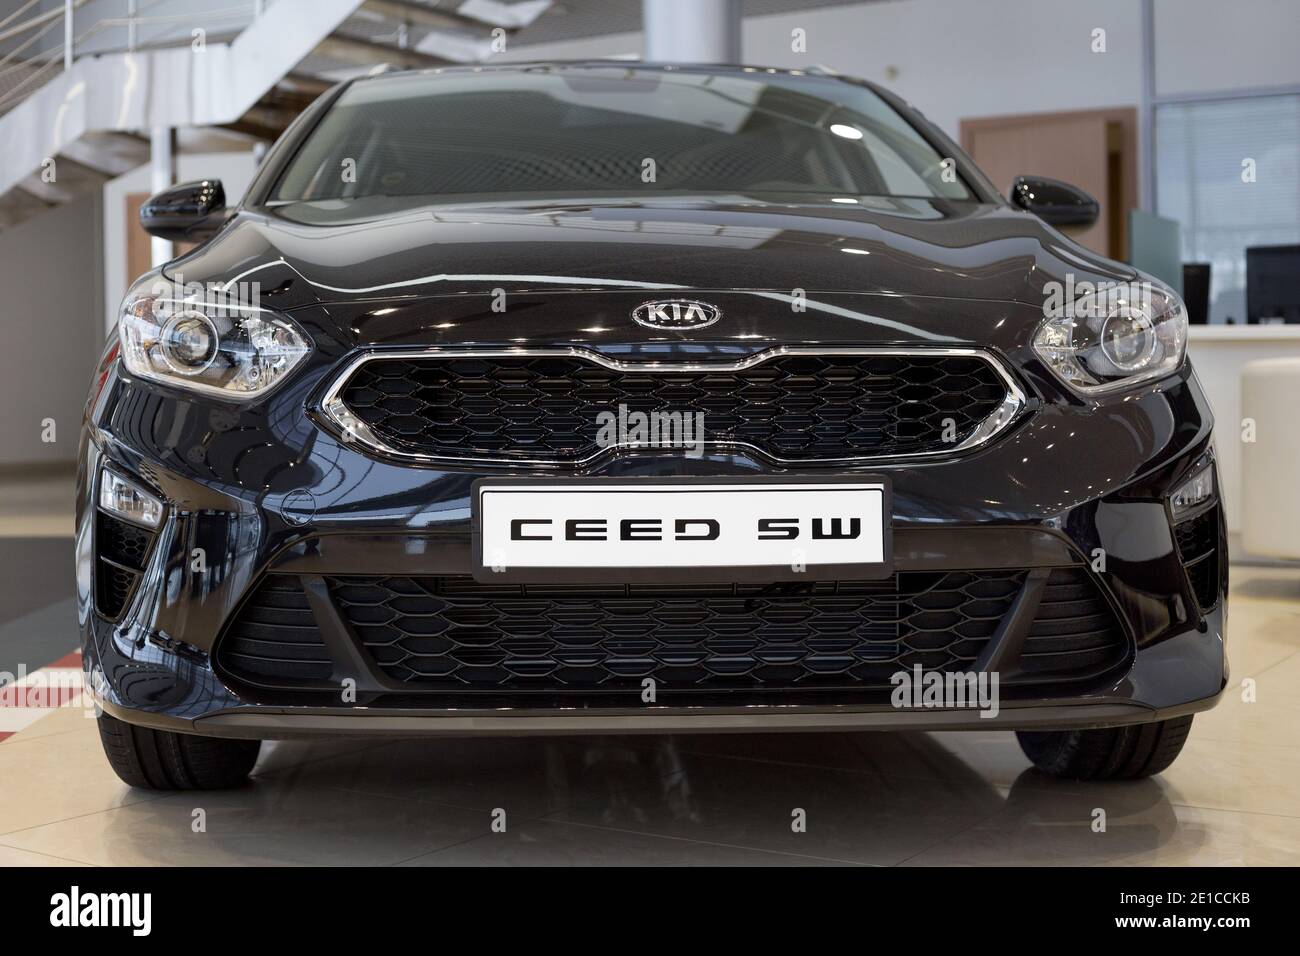 Russia, Izhevsk - December 28, 2020: KIA showroom. New Ceed SW car in dealer showroom. Front view. Famous world brand. Stock Photo